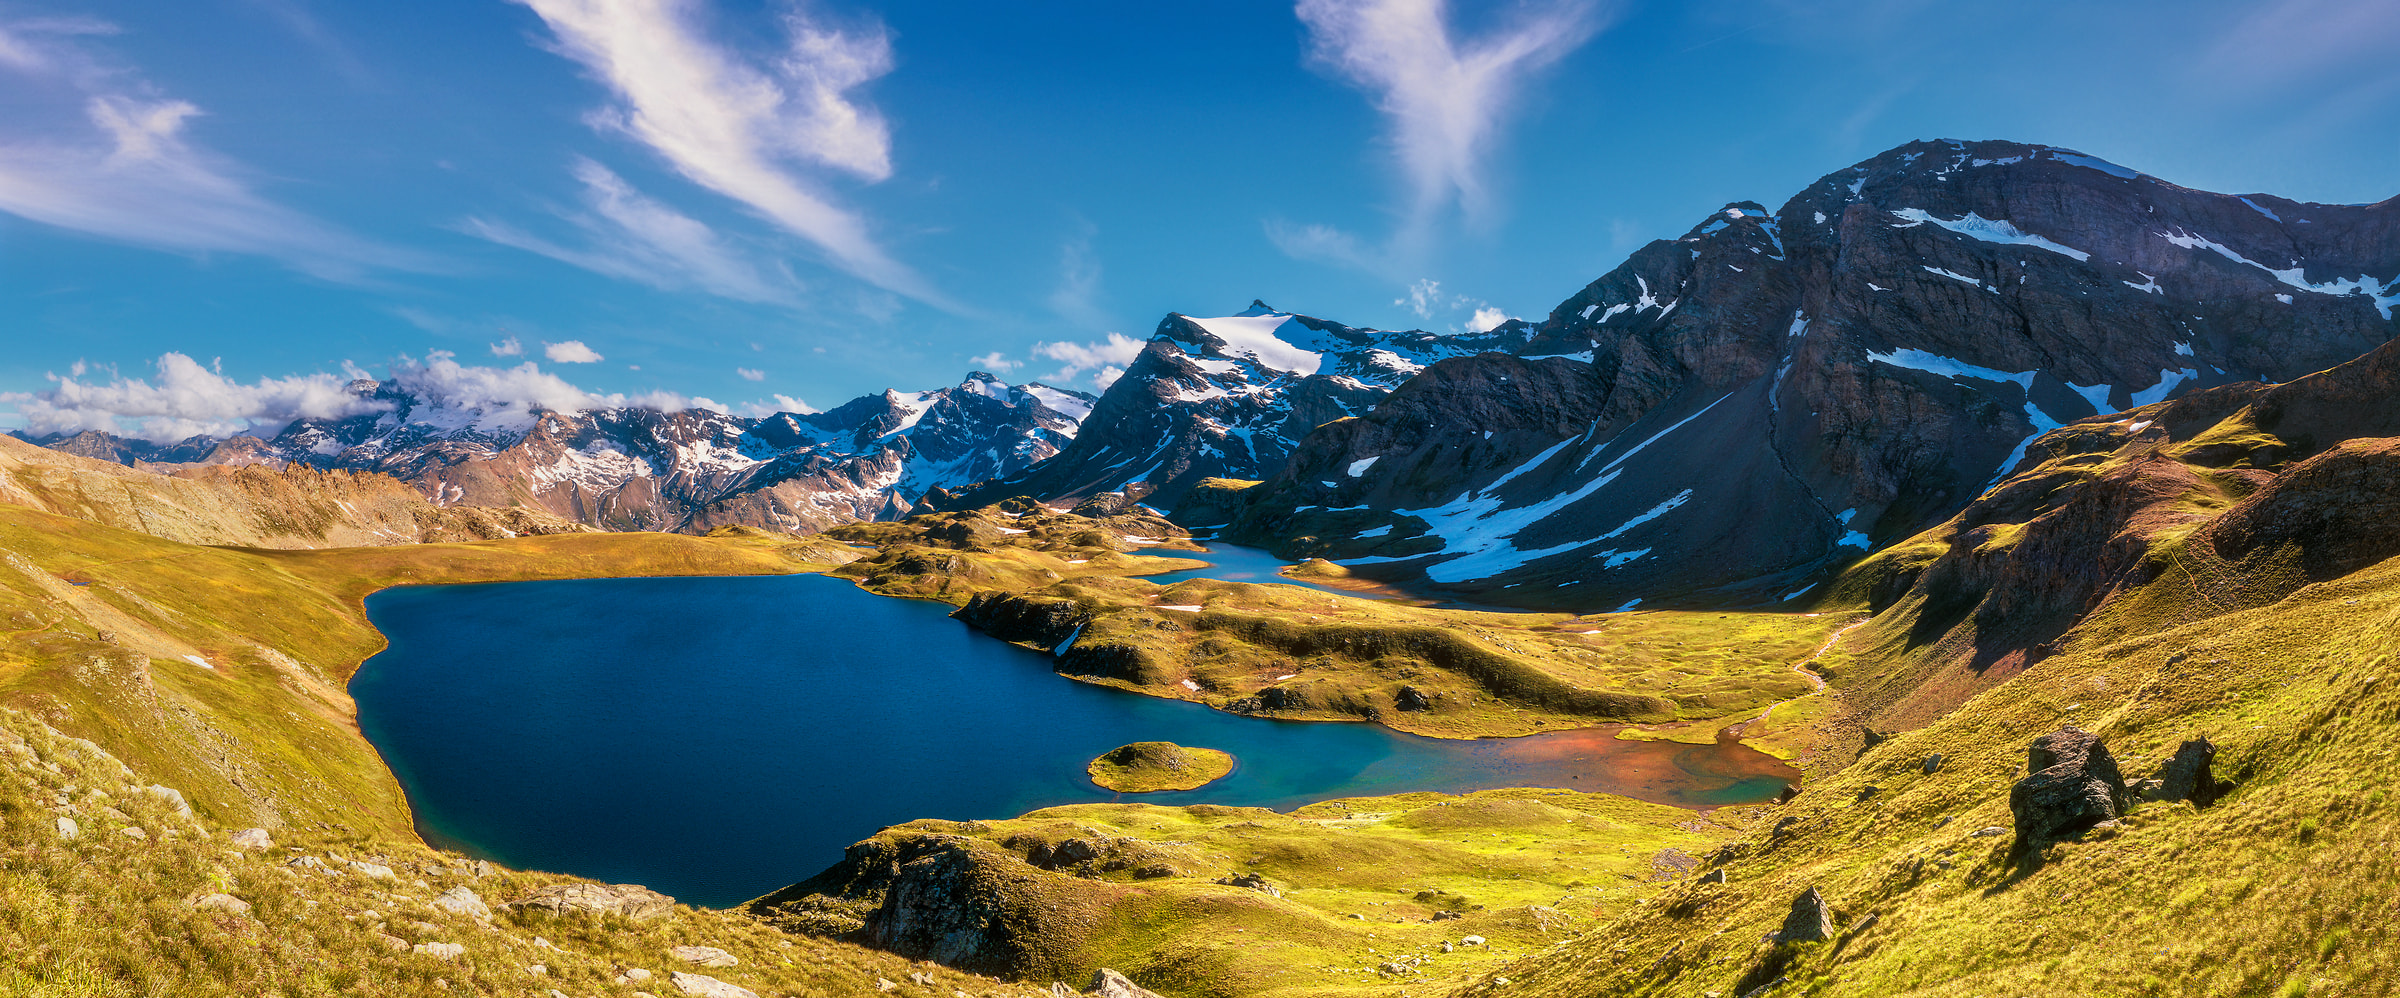 103 megapixels! A very high resolution, large-format VAST photograph of an alpine lake with mountains and a blue sky with clouds; landscape photograph created by Duilio Fiorille in Gran Paradiso National Park, Ceresole Reale, Piedmont, Italy